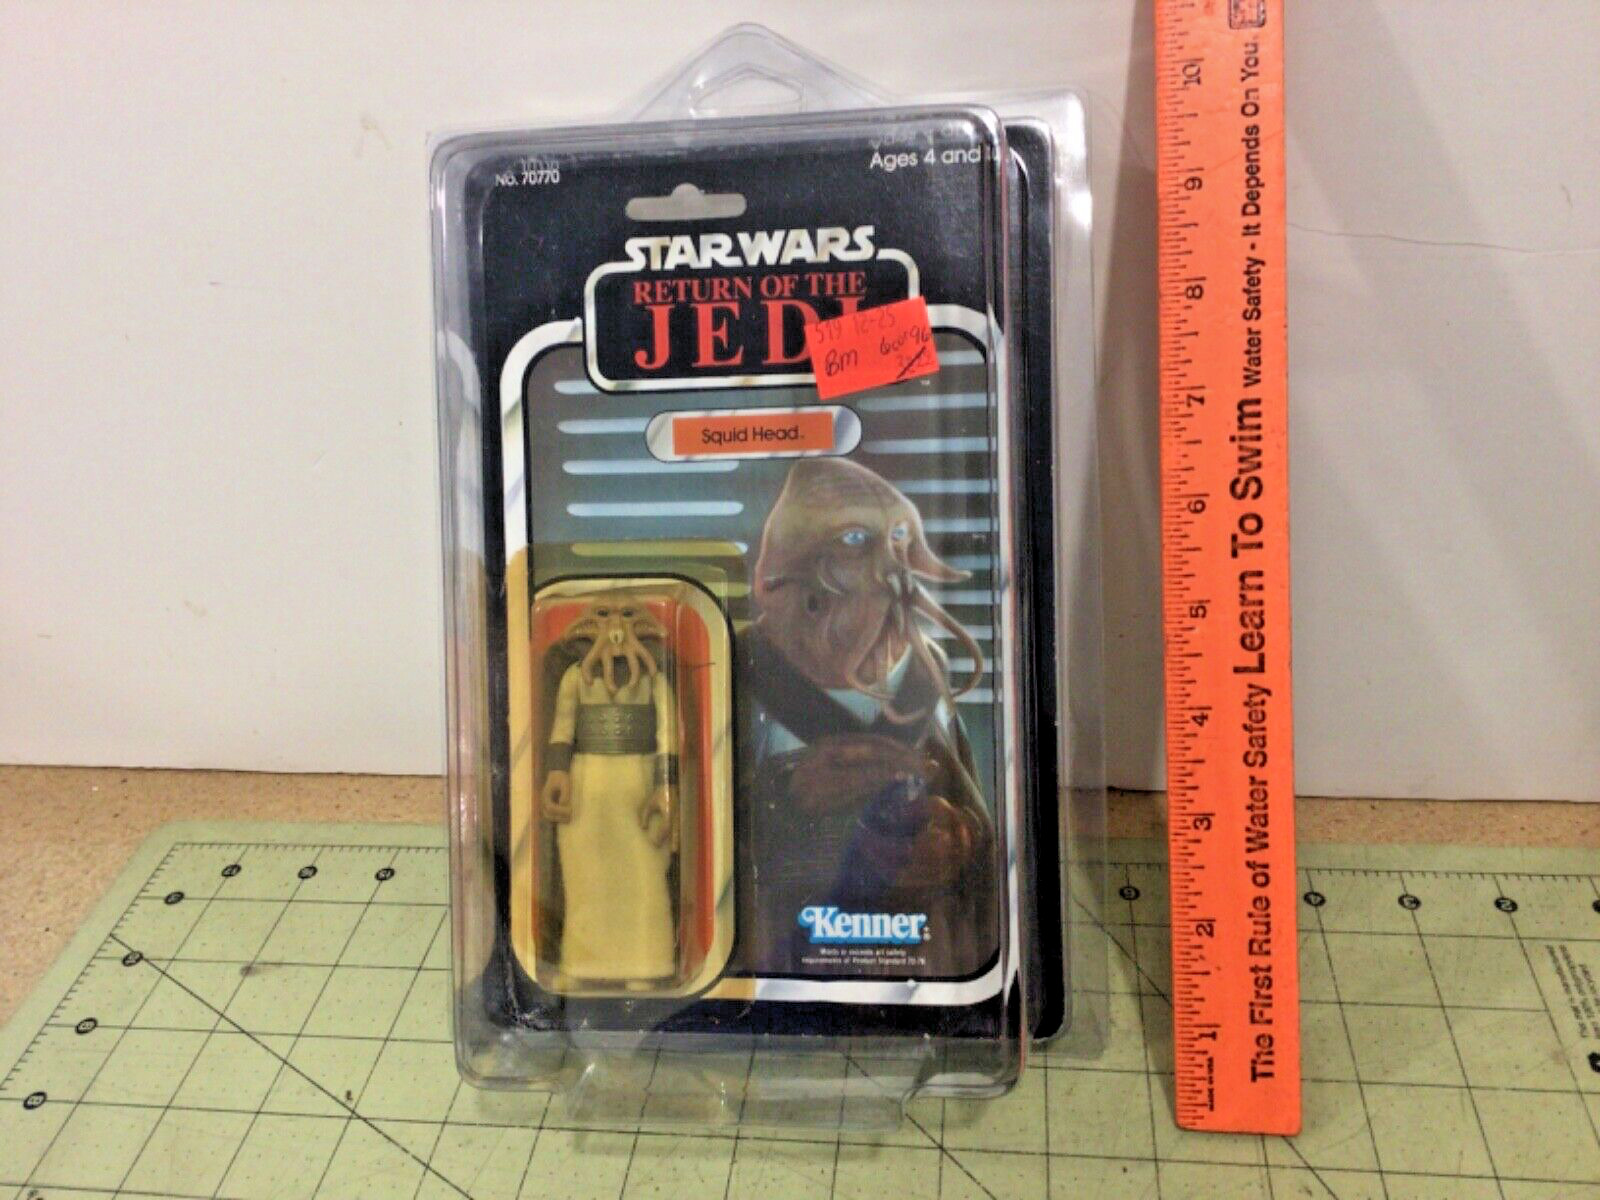 Vintage 1983 Star Wars Squid Head carded action figure protector